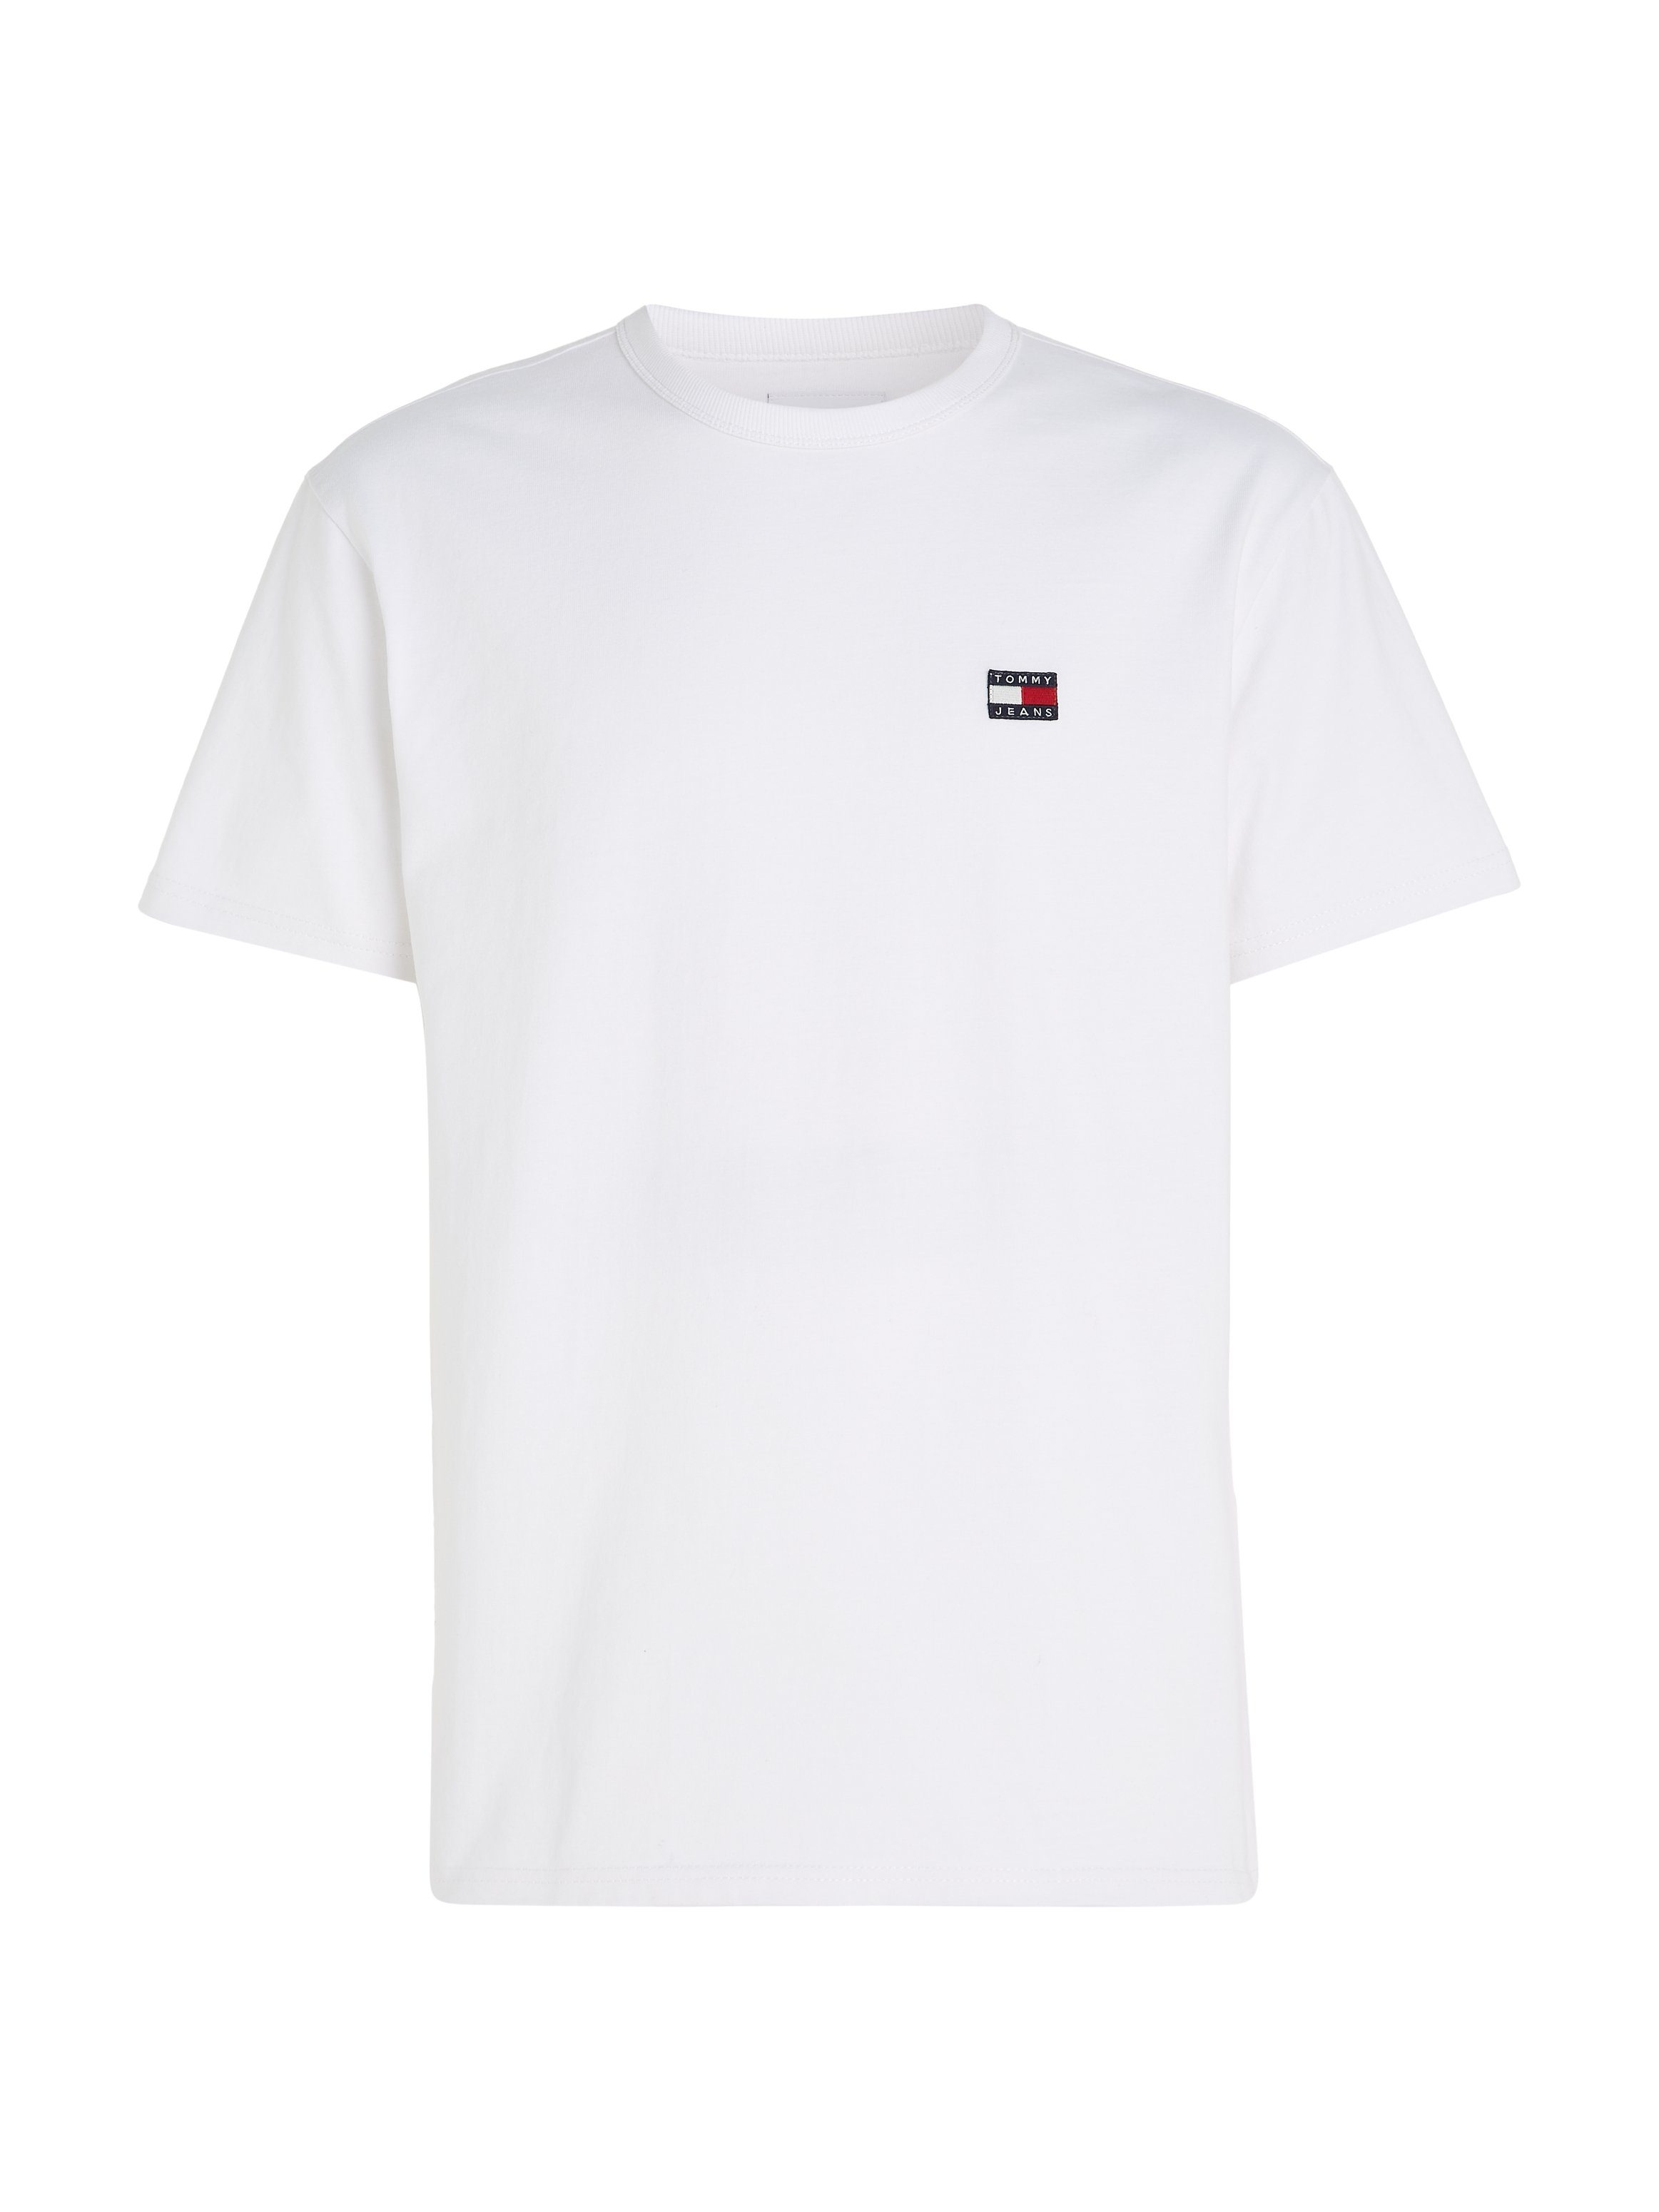 CLSC TJM TOMMY Jeans BADGE Tommy T-Shirt XS White TEE